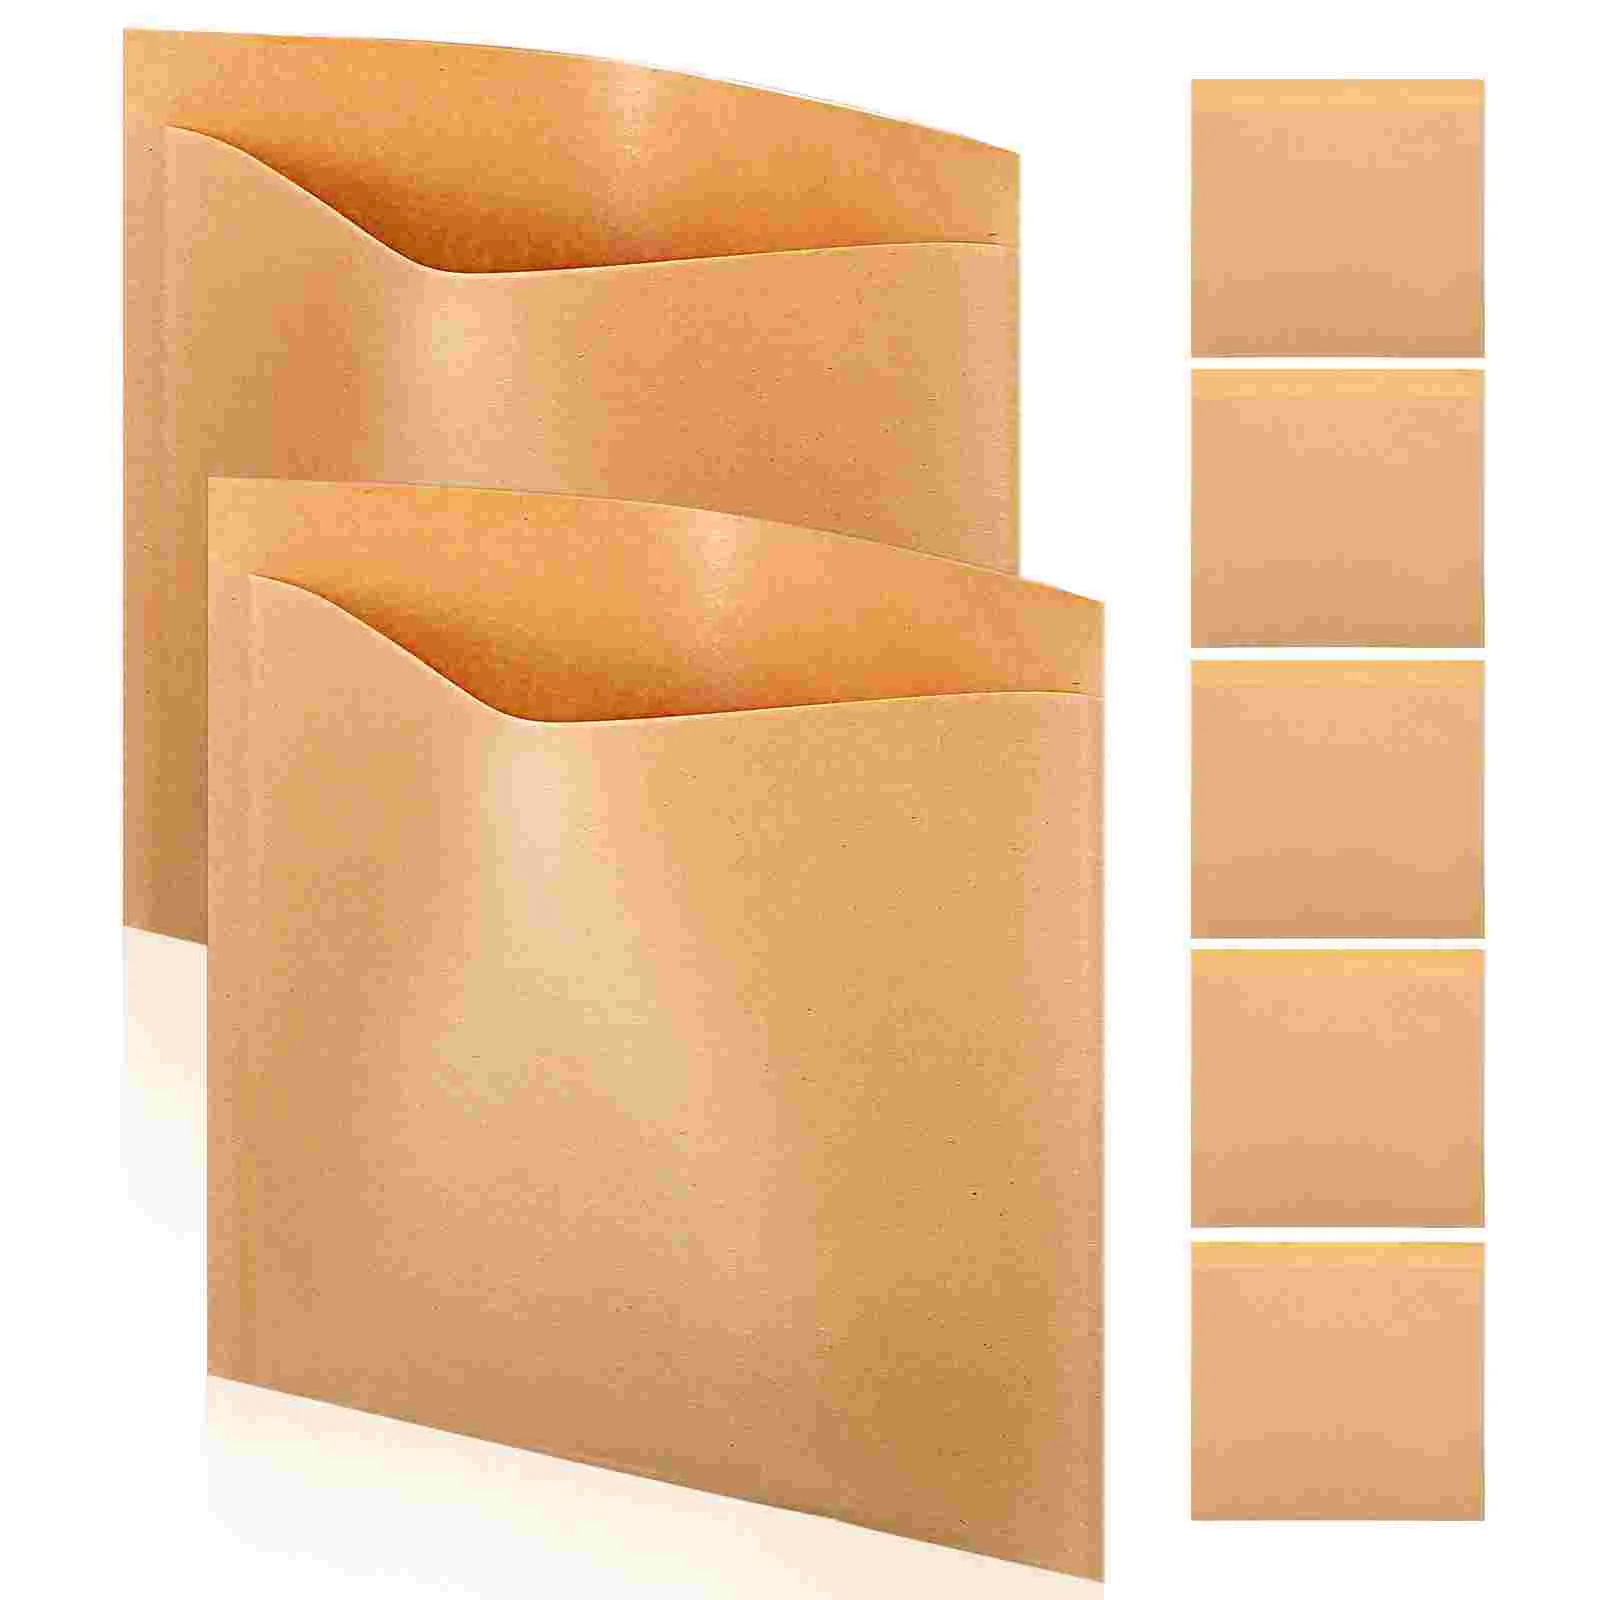 

200 Pcs Greaseproof Paper Treat Bags Kraft Brown Gift Oil Sandwich Wrap Glass Baking Tray Candy Food